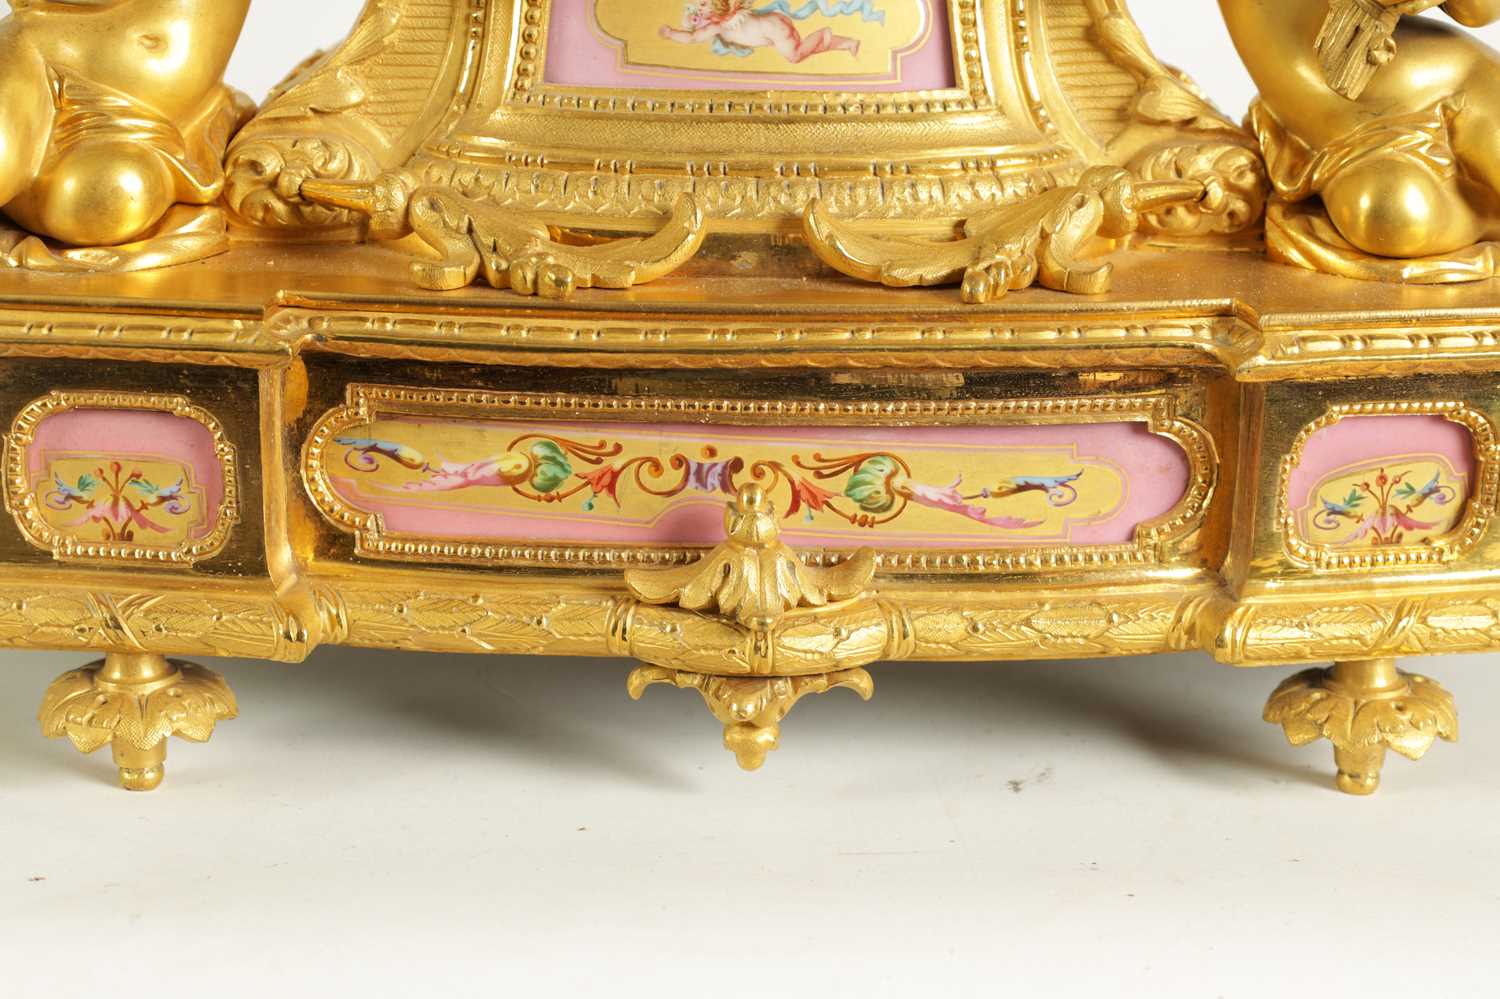 A LATE 19TH CENTURY FRENCH ORMOLU AND PORCELAIN PANELLED FIGURAL MANTEL CLOCK - Image 6 of 12